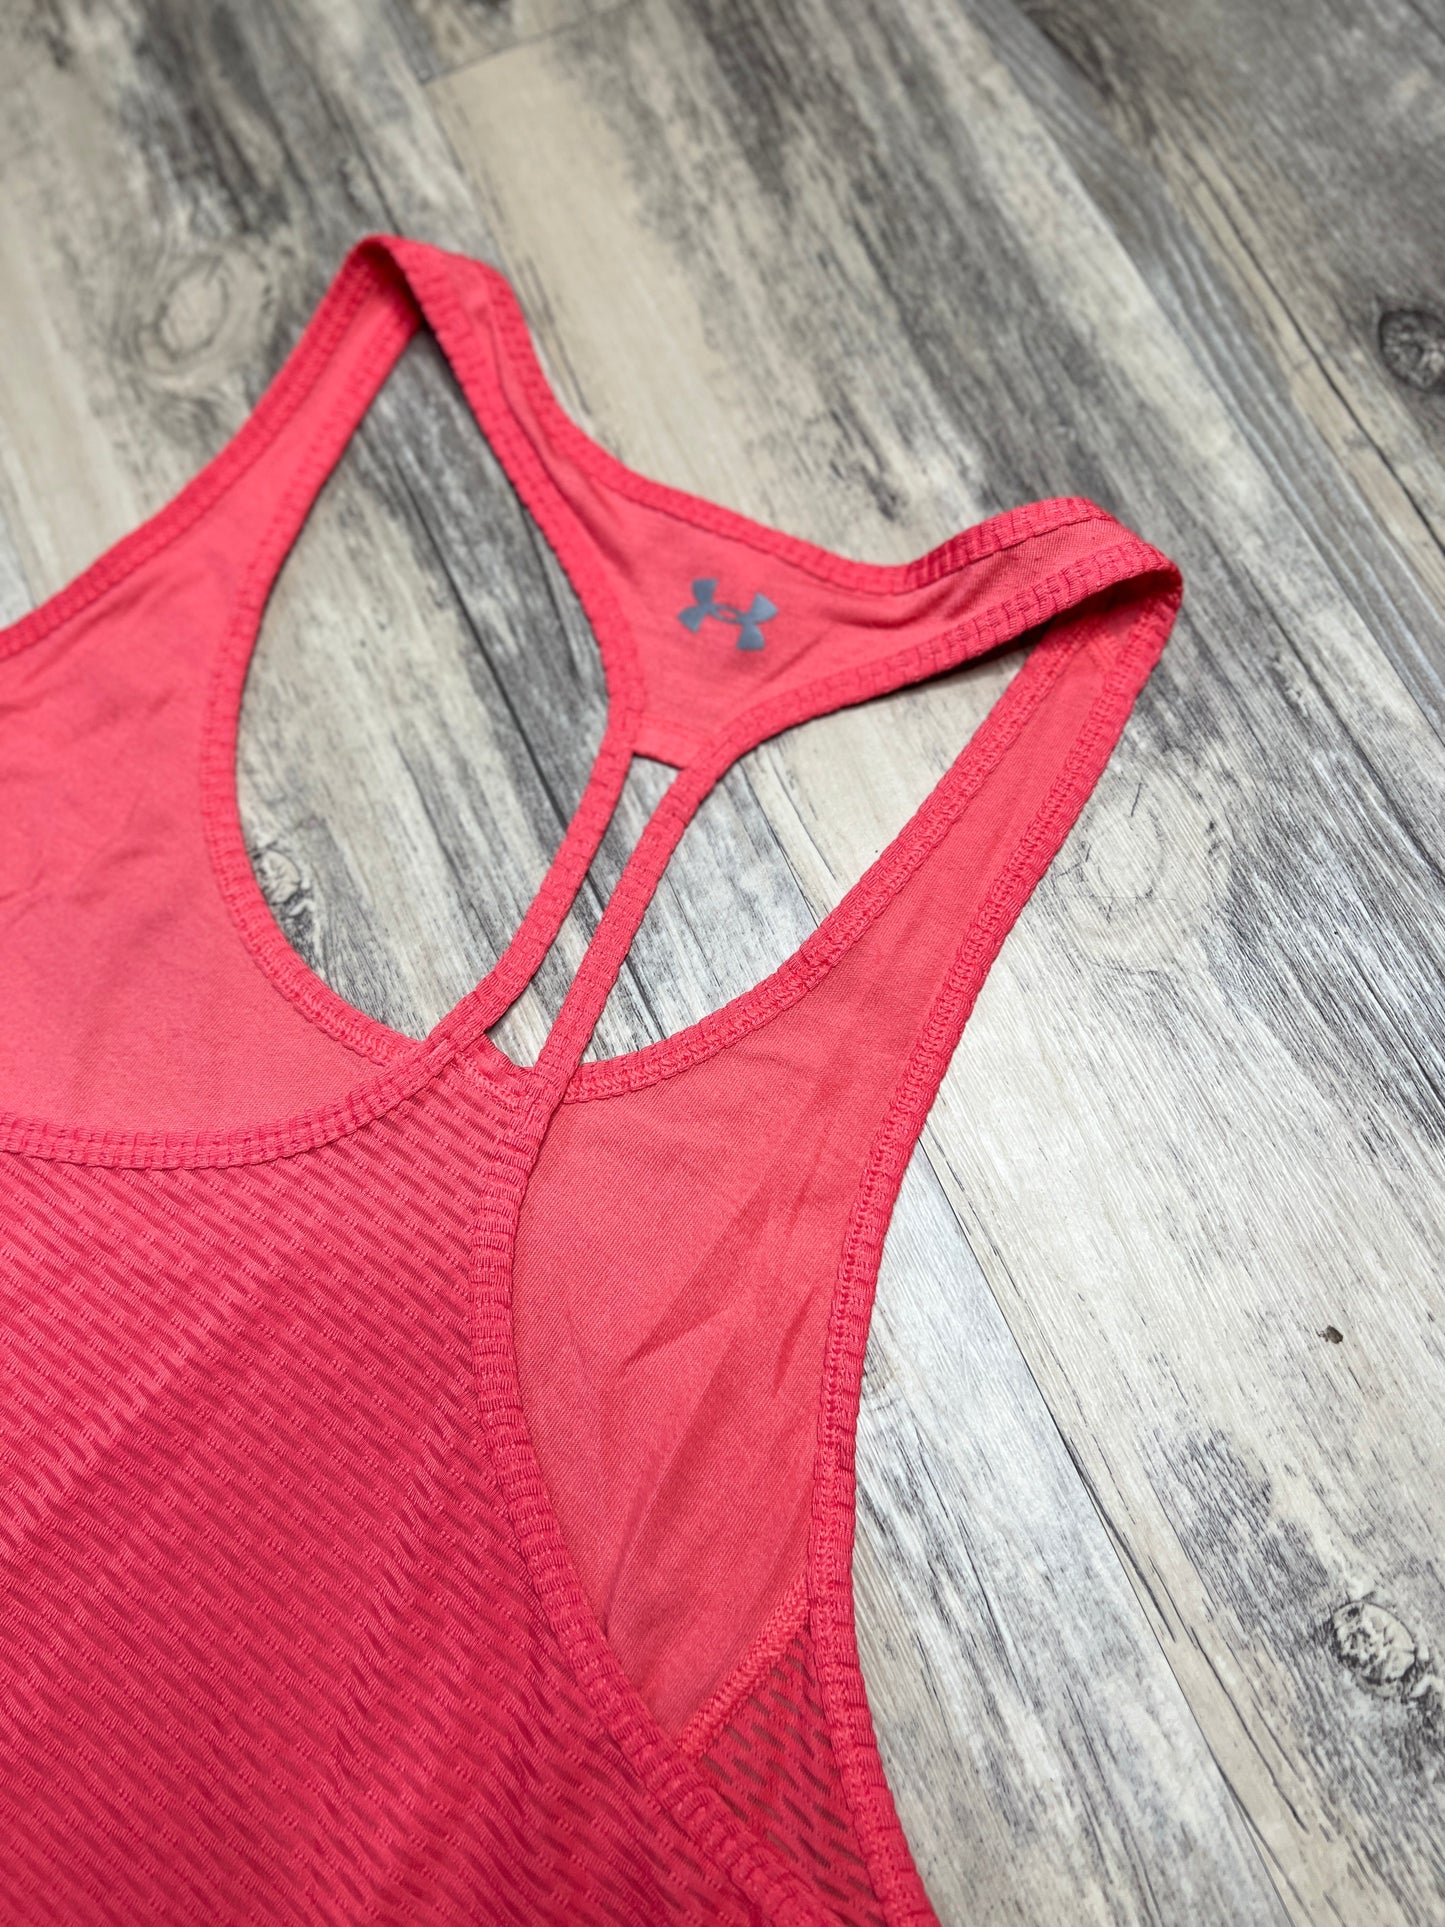 Under Armour Coral Mesh Back Tank - L